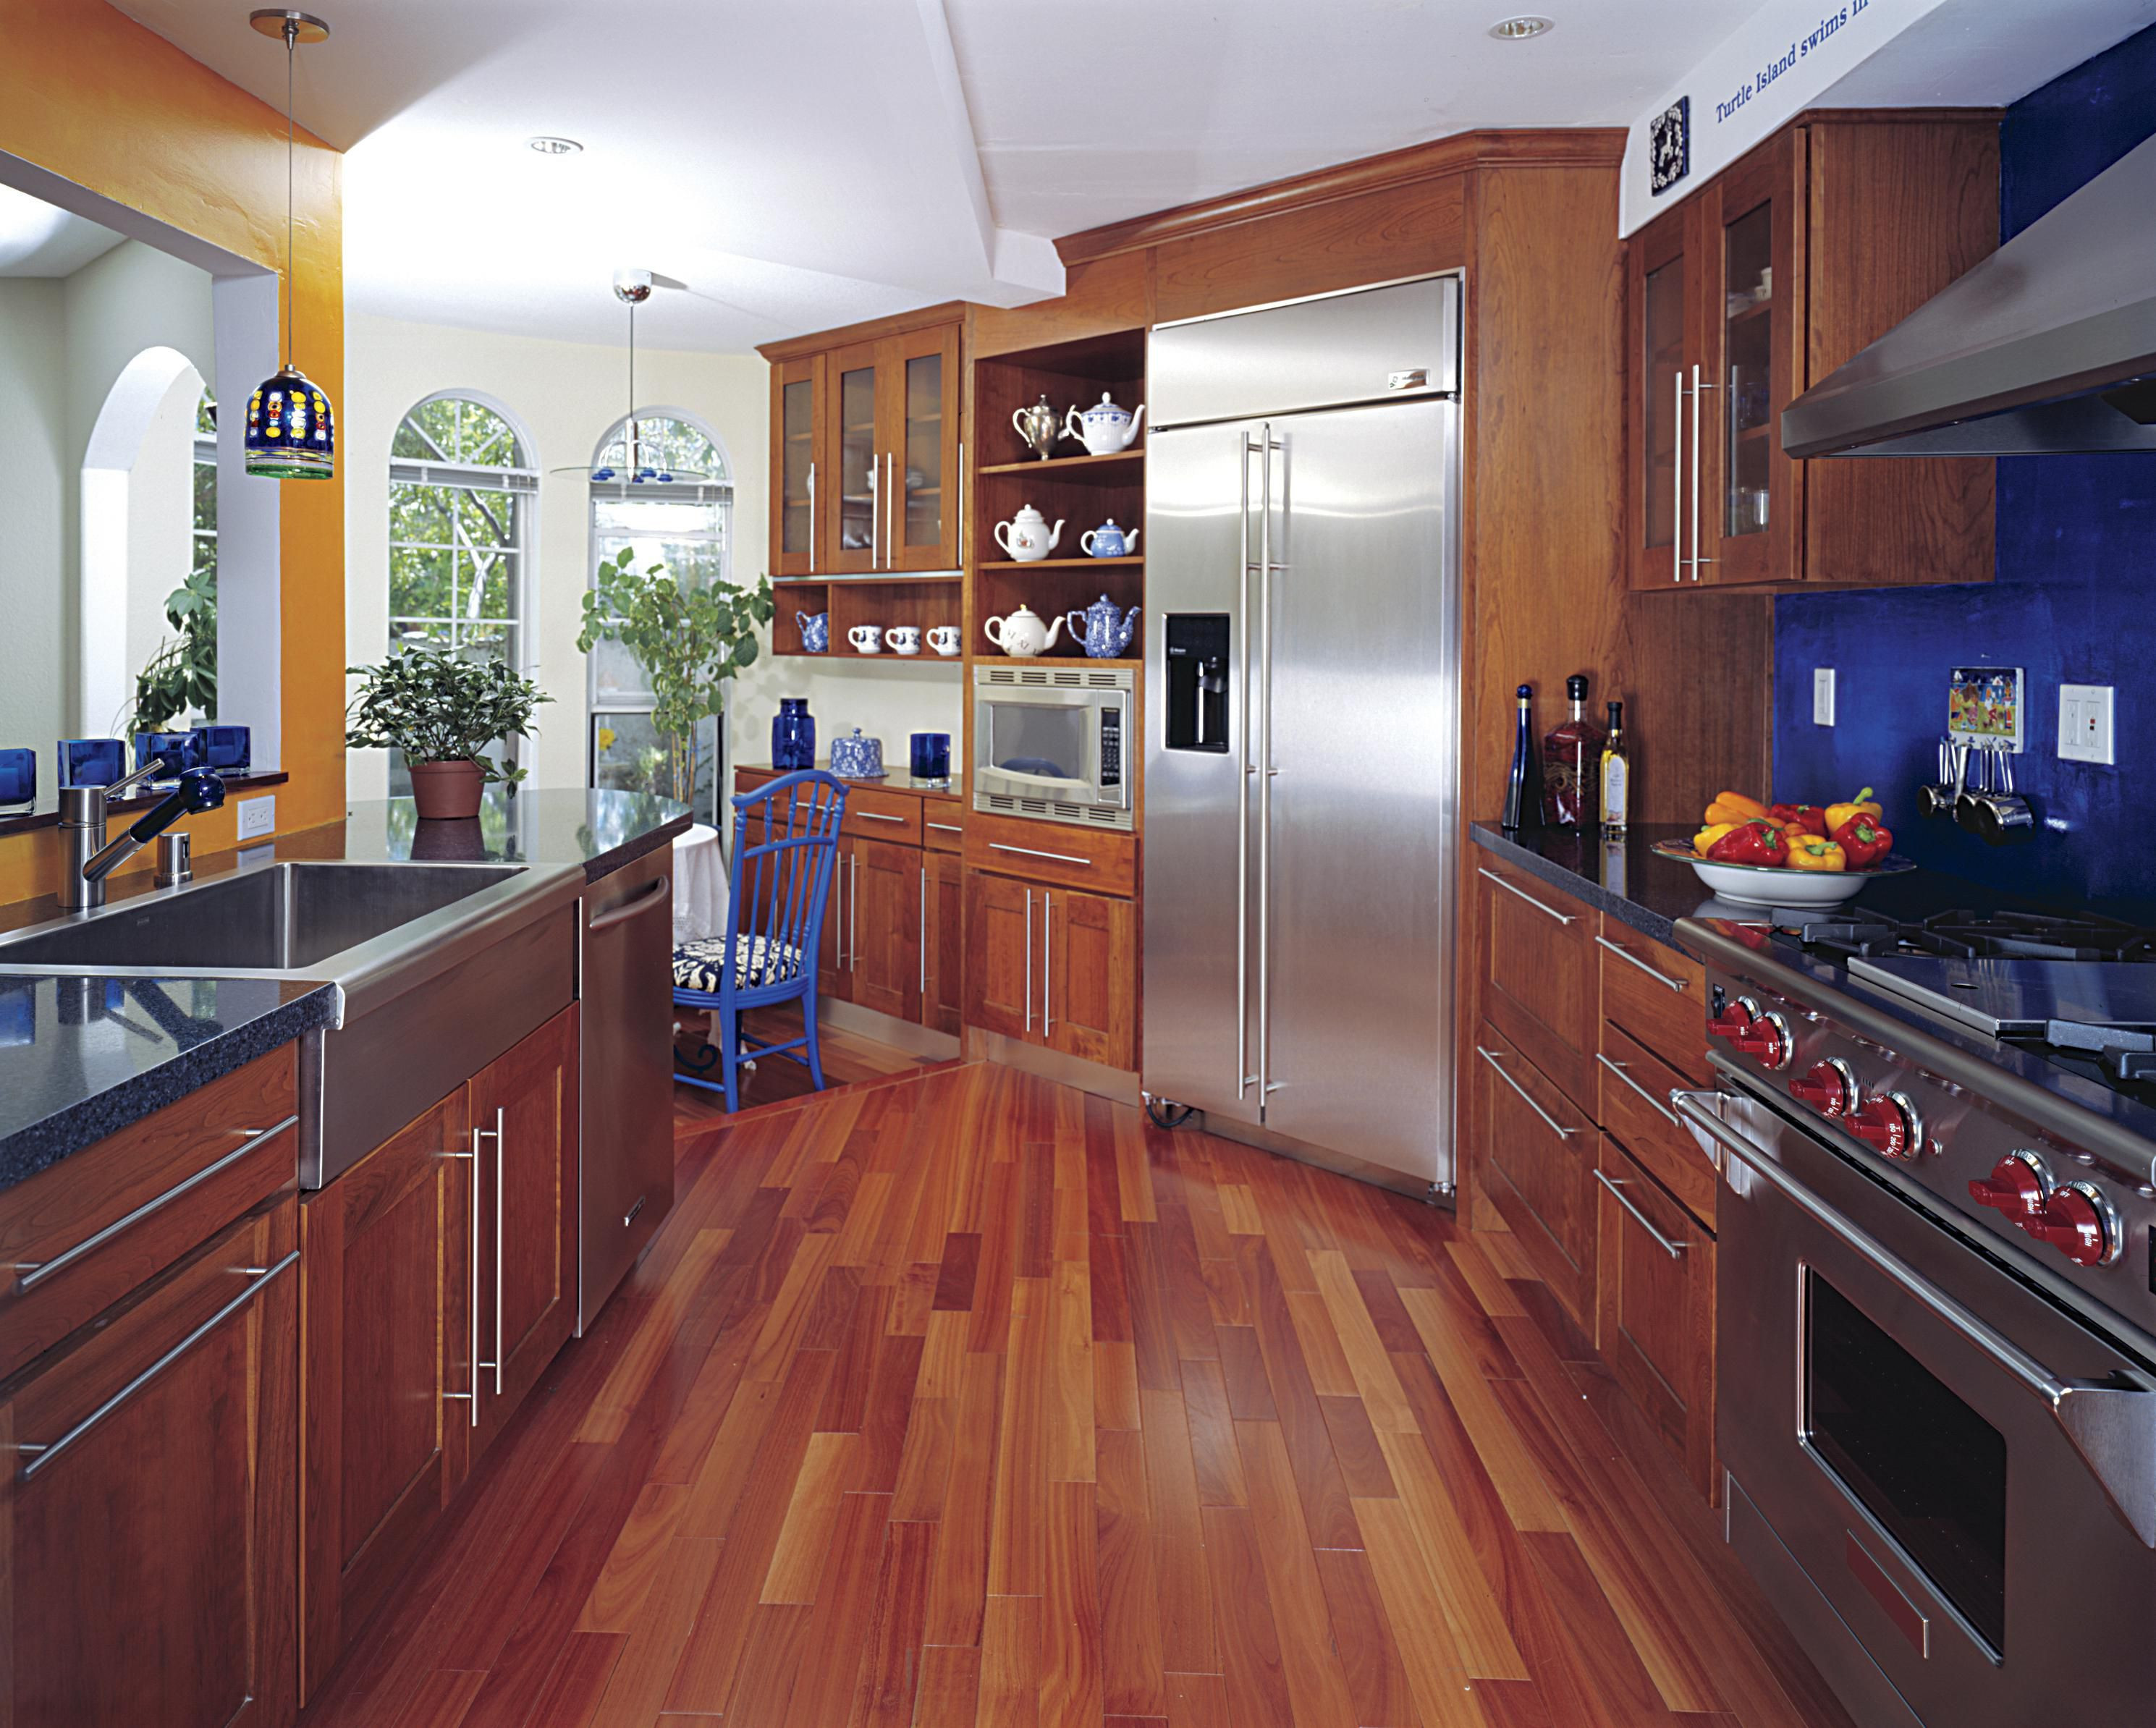 13 Fashionable Hickory Vs Red Oak Hardwood Flooring 2024 free download hickory vs red oak hardwood flooring of hardwood floor in a kitchen is this allowed with regard to 186828472 56a49f3a5f9b58b7d0d7e142